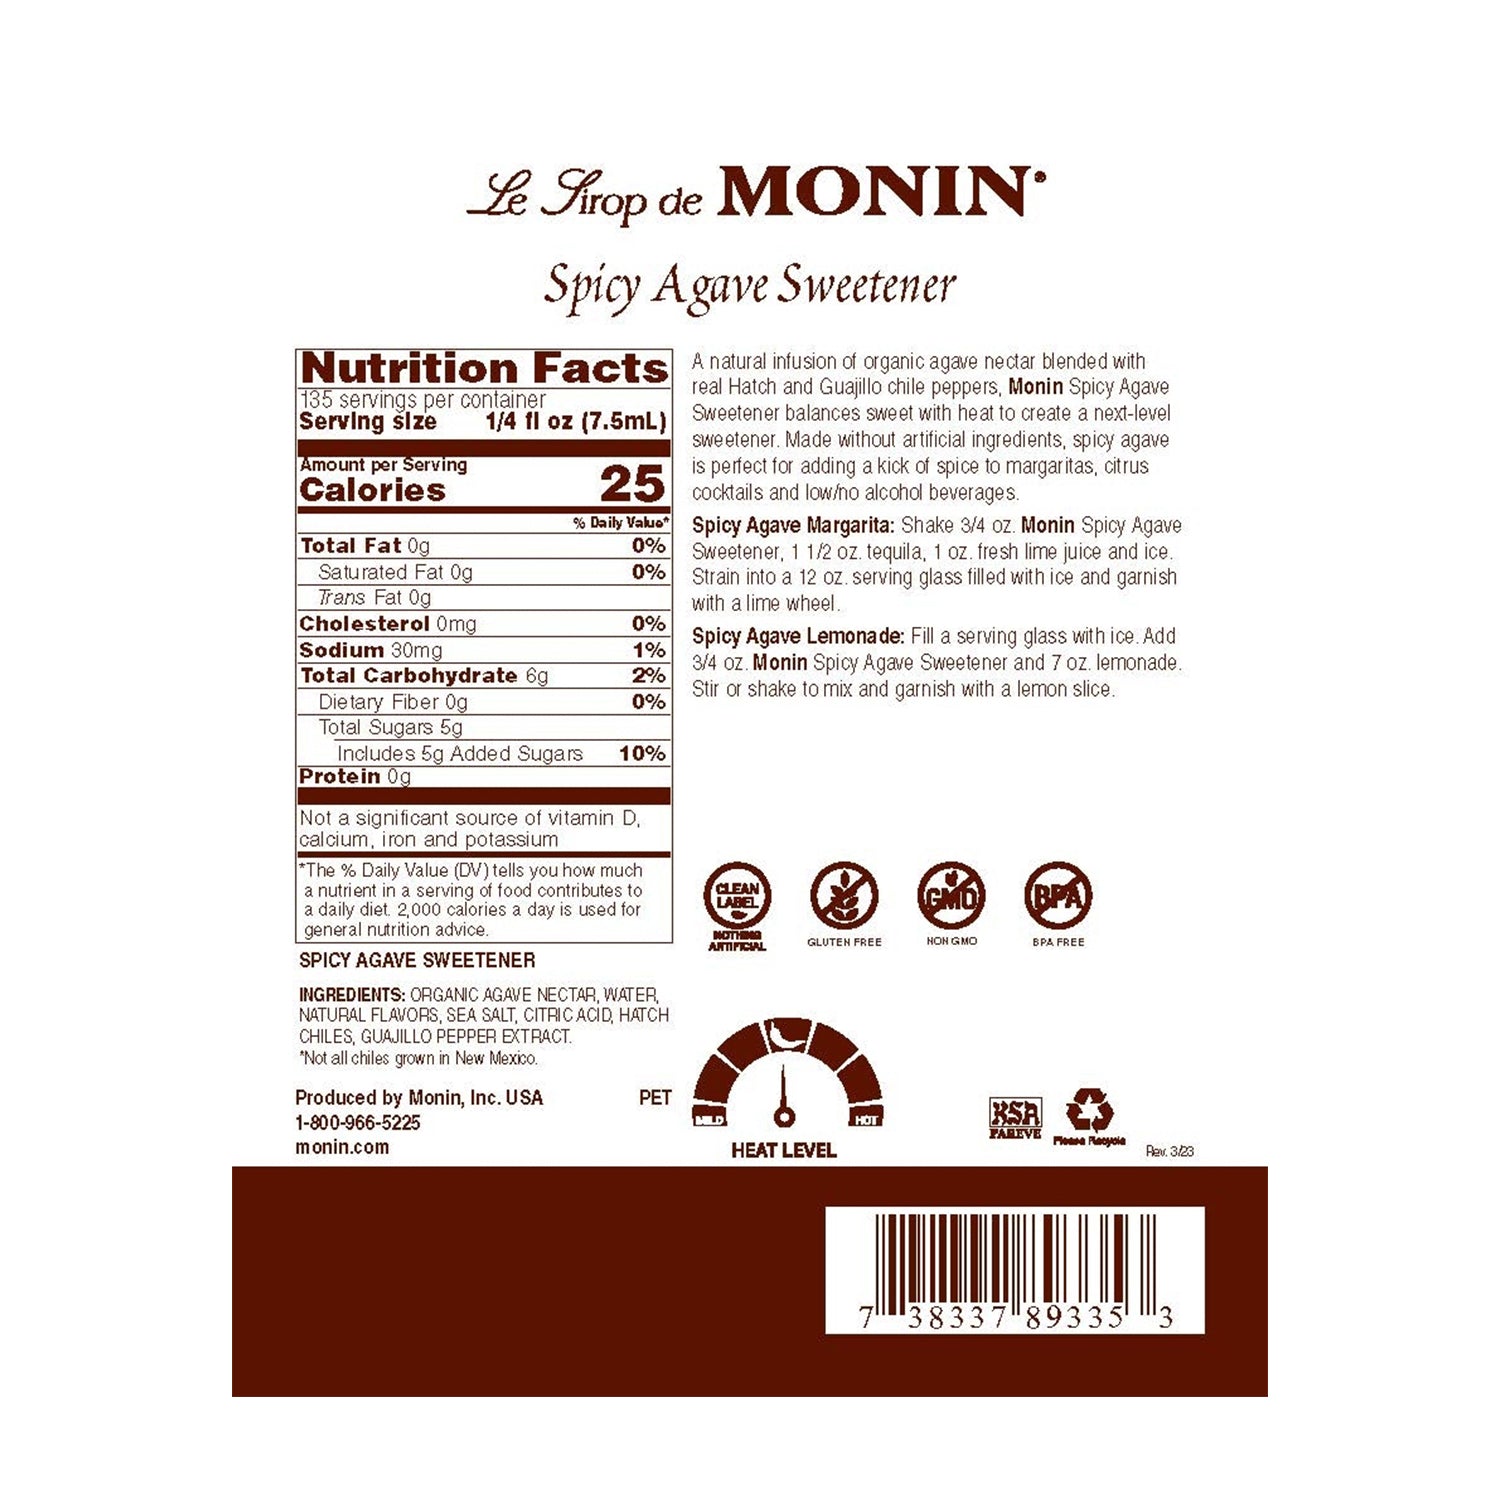 Monin Spicy Agave Sweetener nutrition facts and recipes label